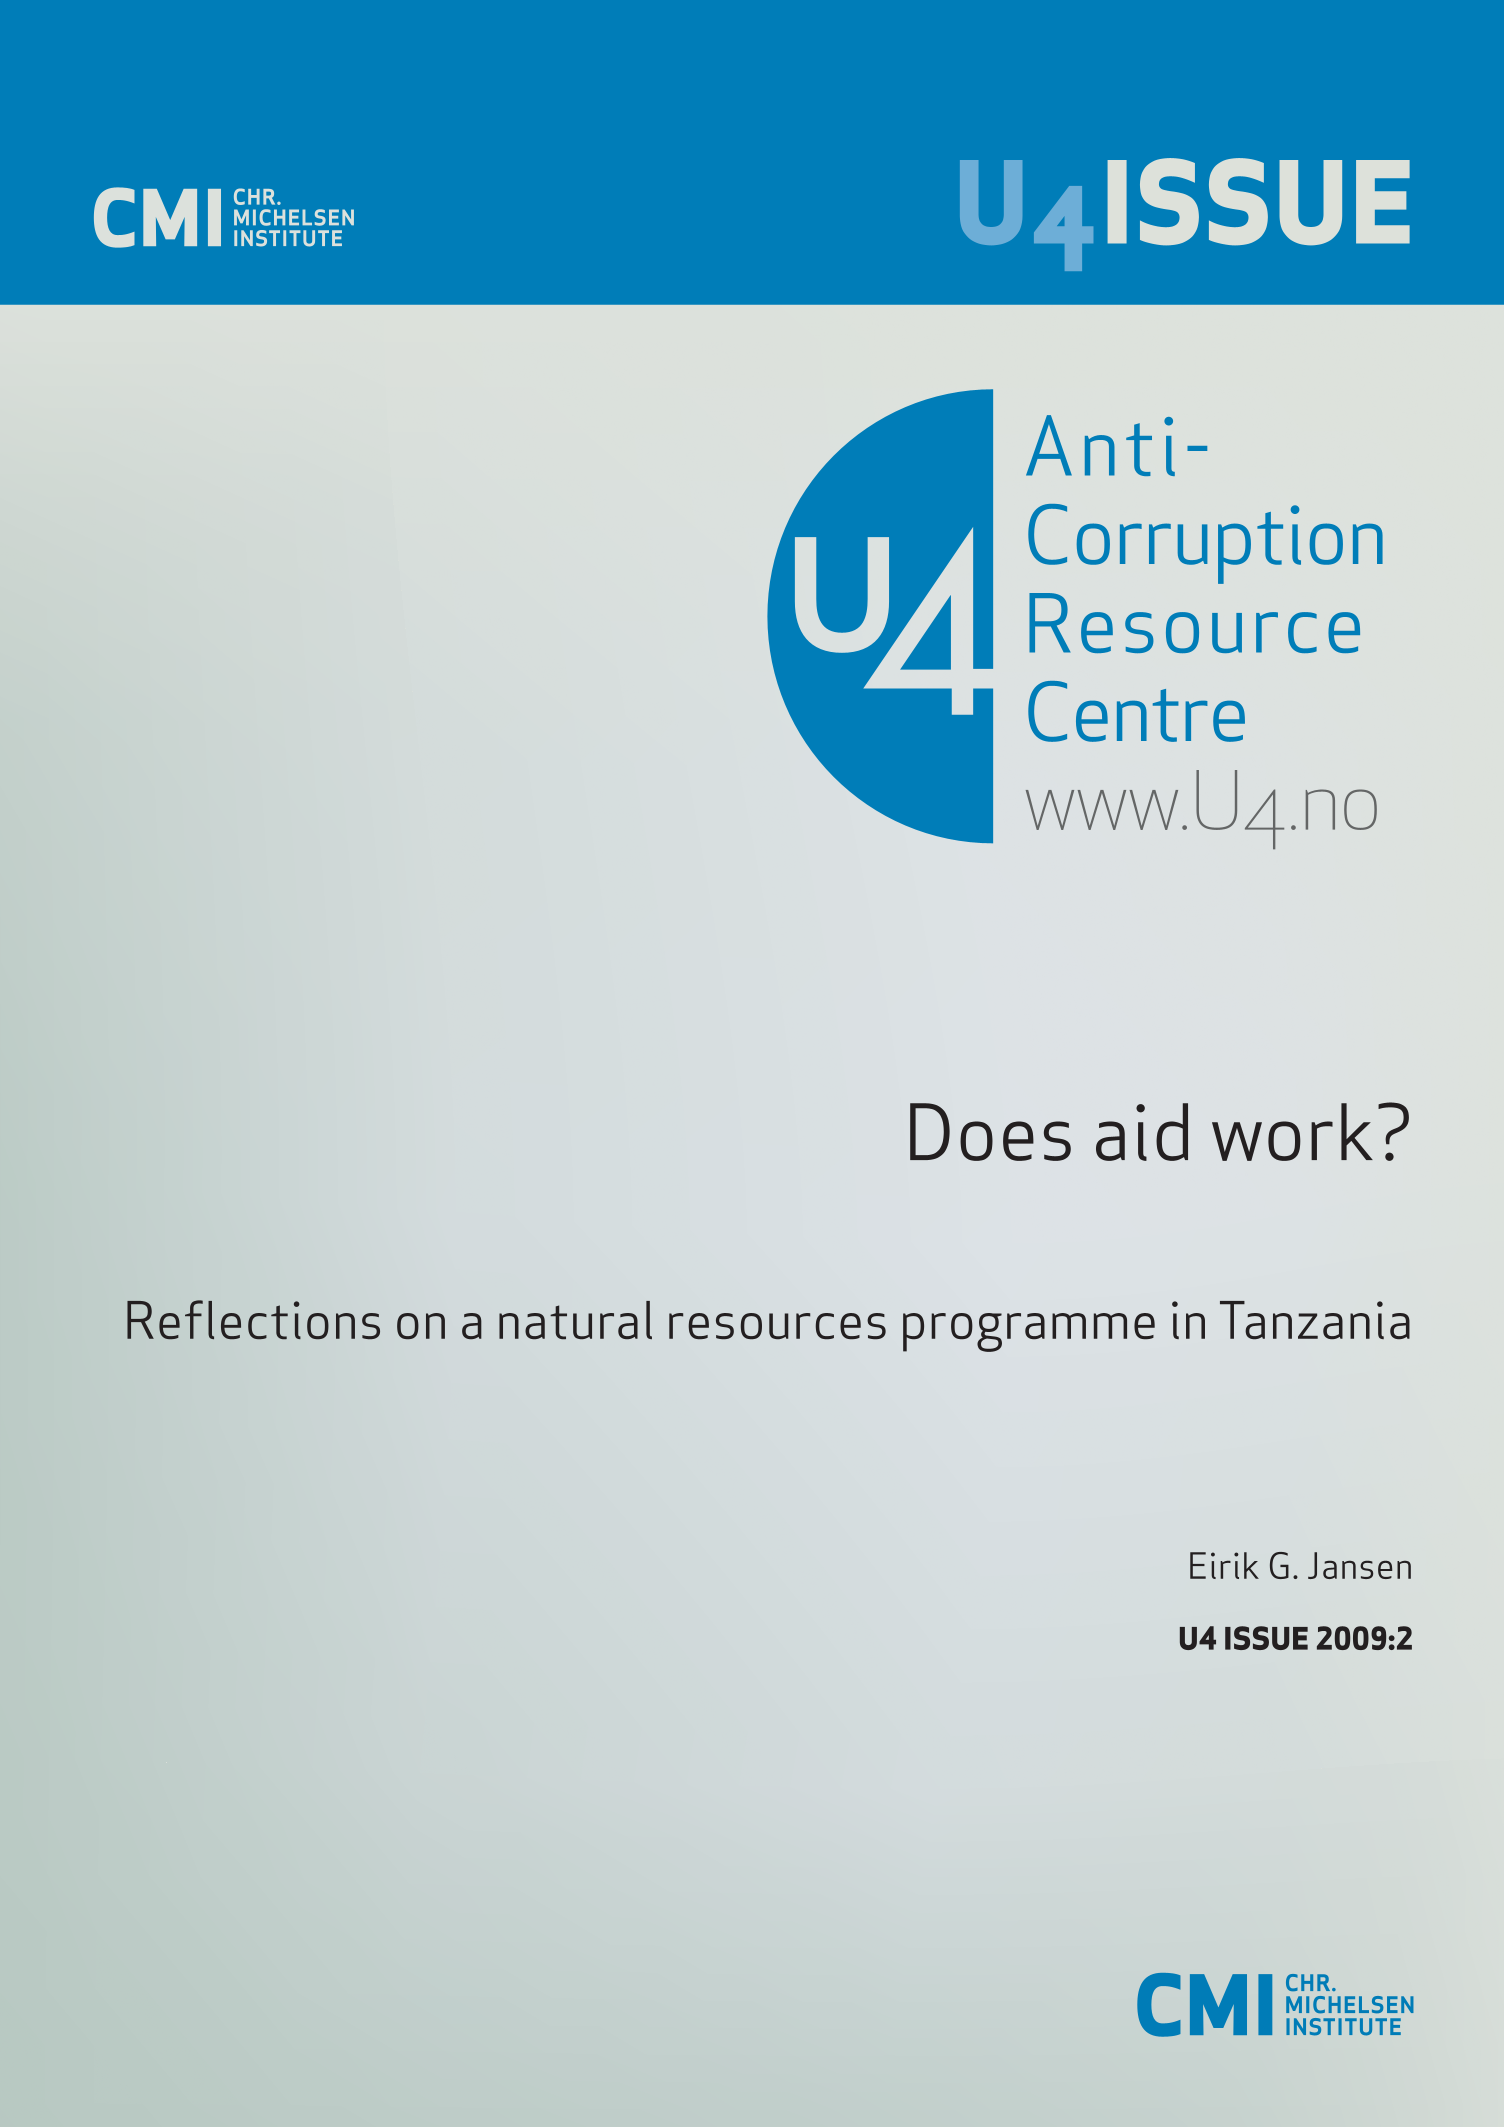 Does aid work? Reflections on a natural resources programme in Tanzania